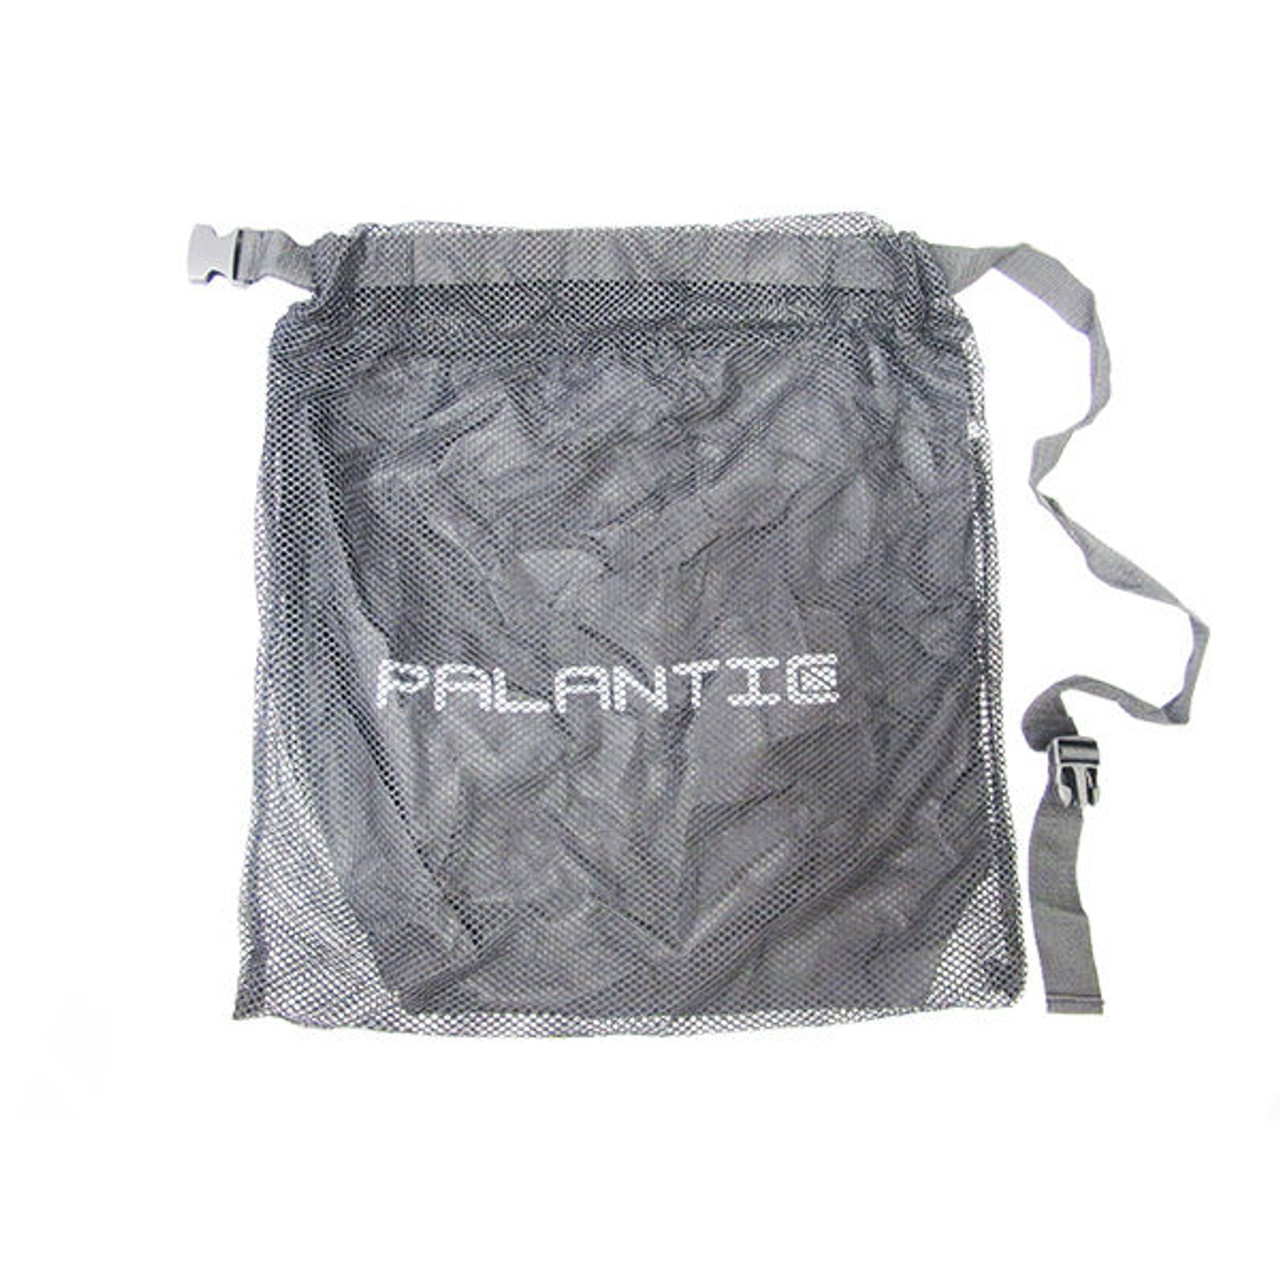 Spearfishing Palantic Large Fish Lobster Catch Bag 20 x 18 with